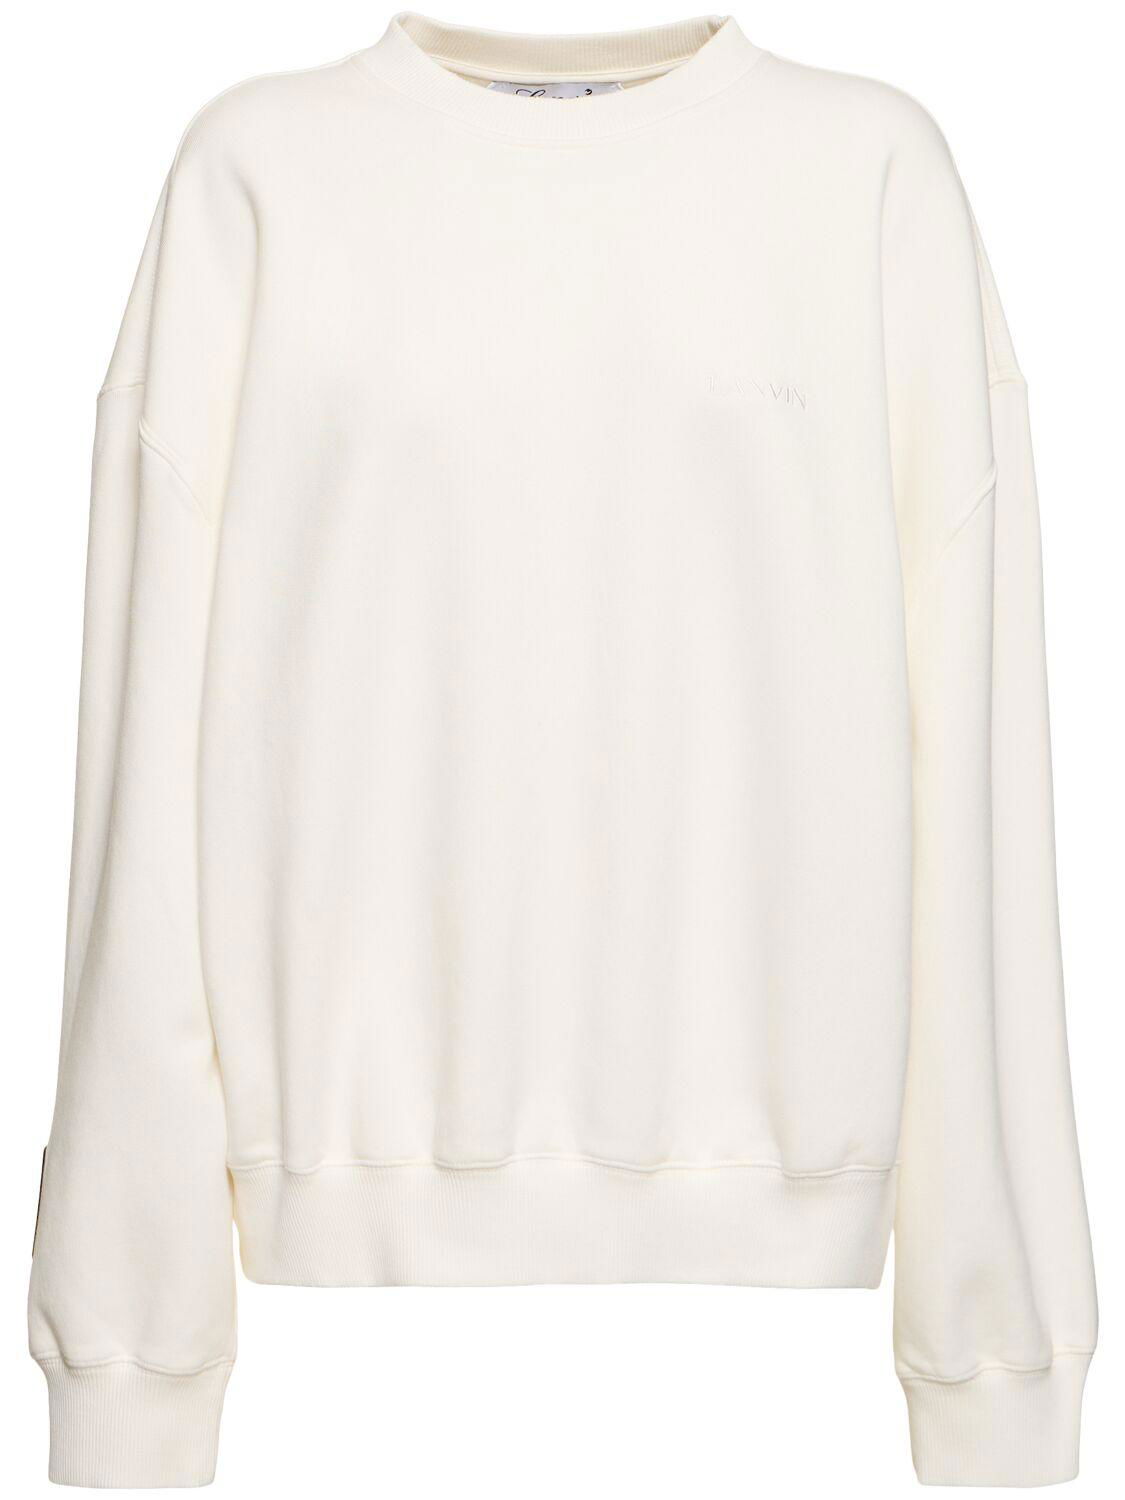 Printed Long Sleeve T-shirt by LANVIN